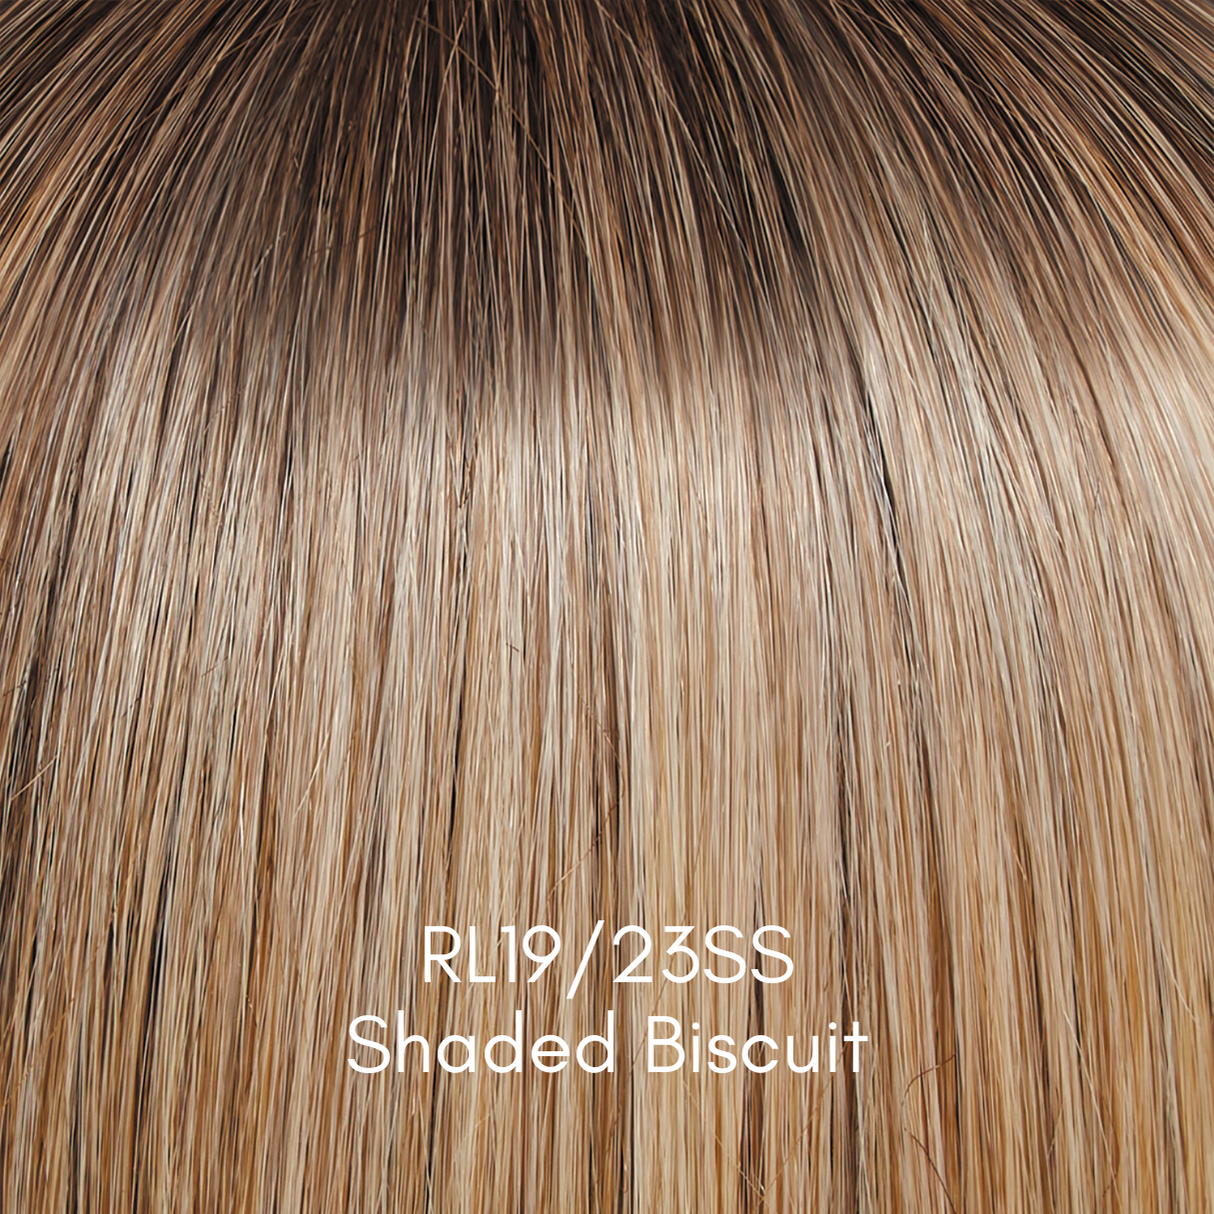 Black Tie Chic - Signature Wig Collection by Raquel Welch